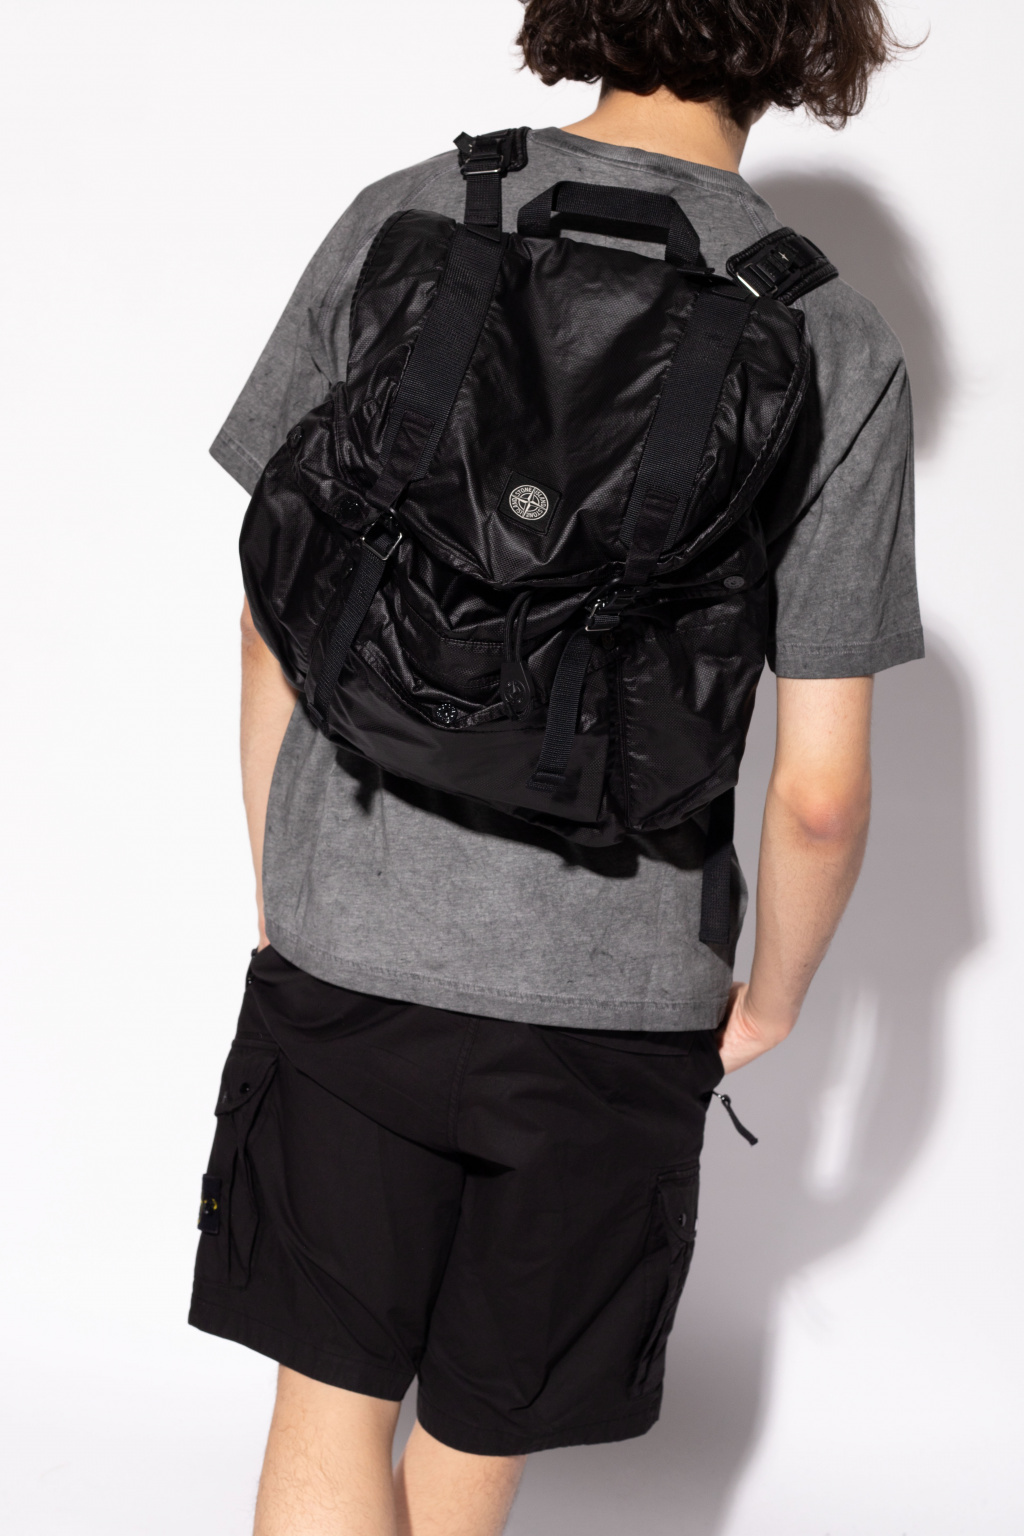 Stone Island Backpack with pockets | Men's Bags | Vitkac